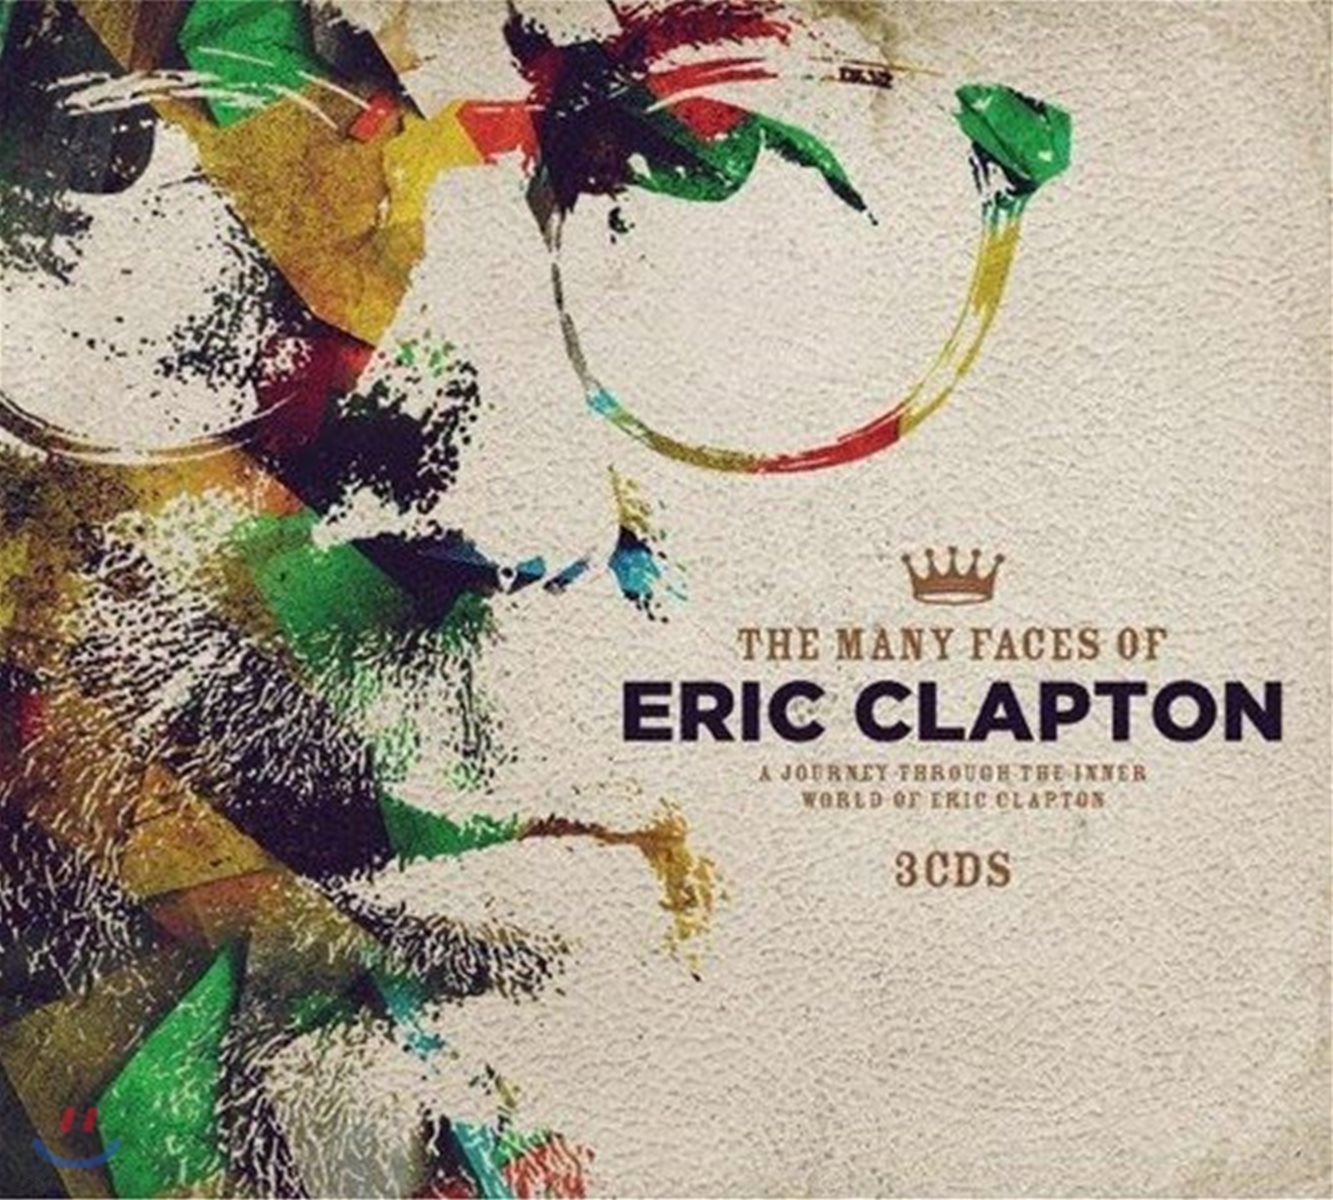 Eric Clapton (에릭 클랩튼) - The Many Faces Of Eric Clapton